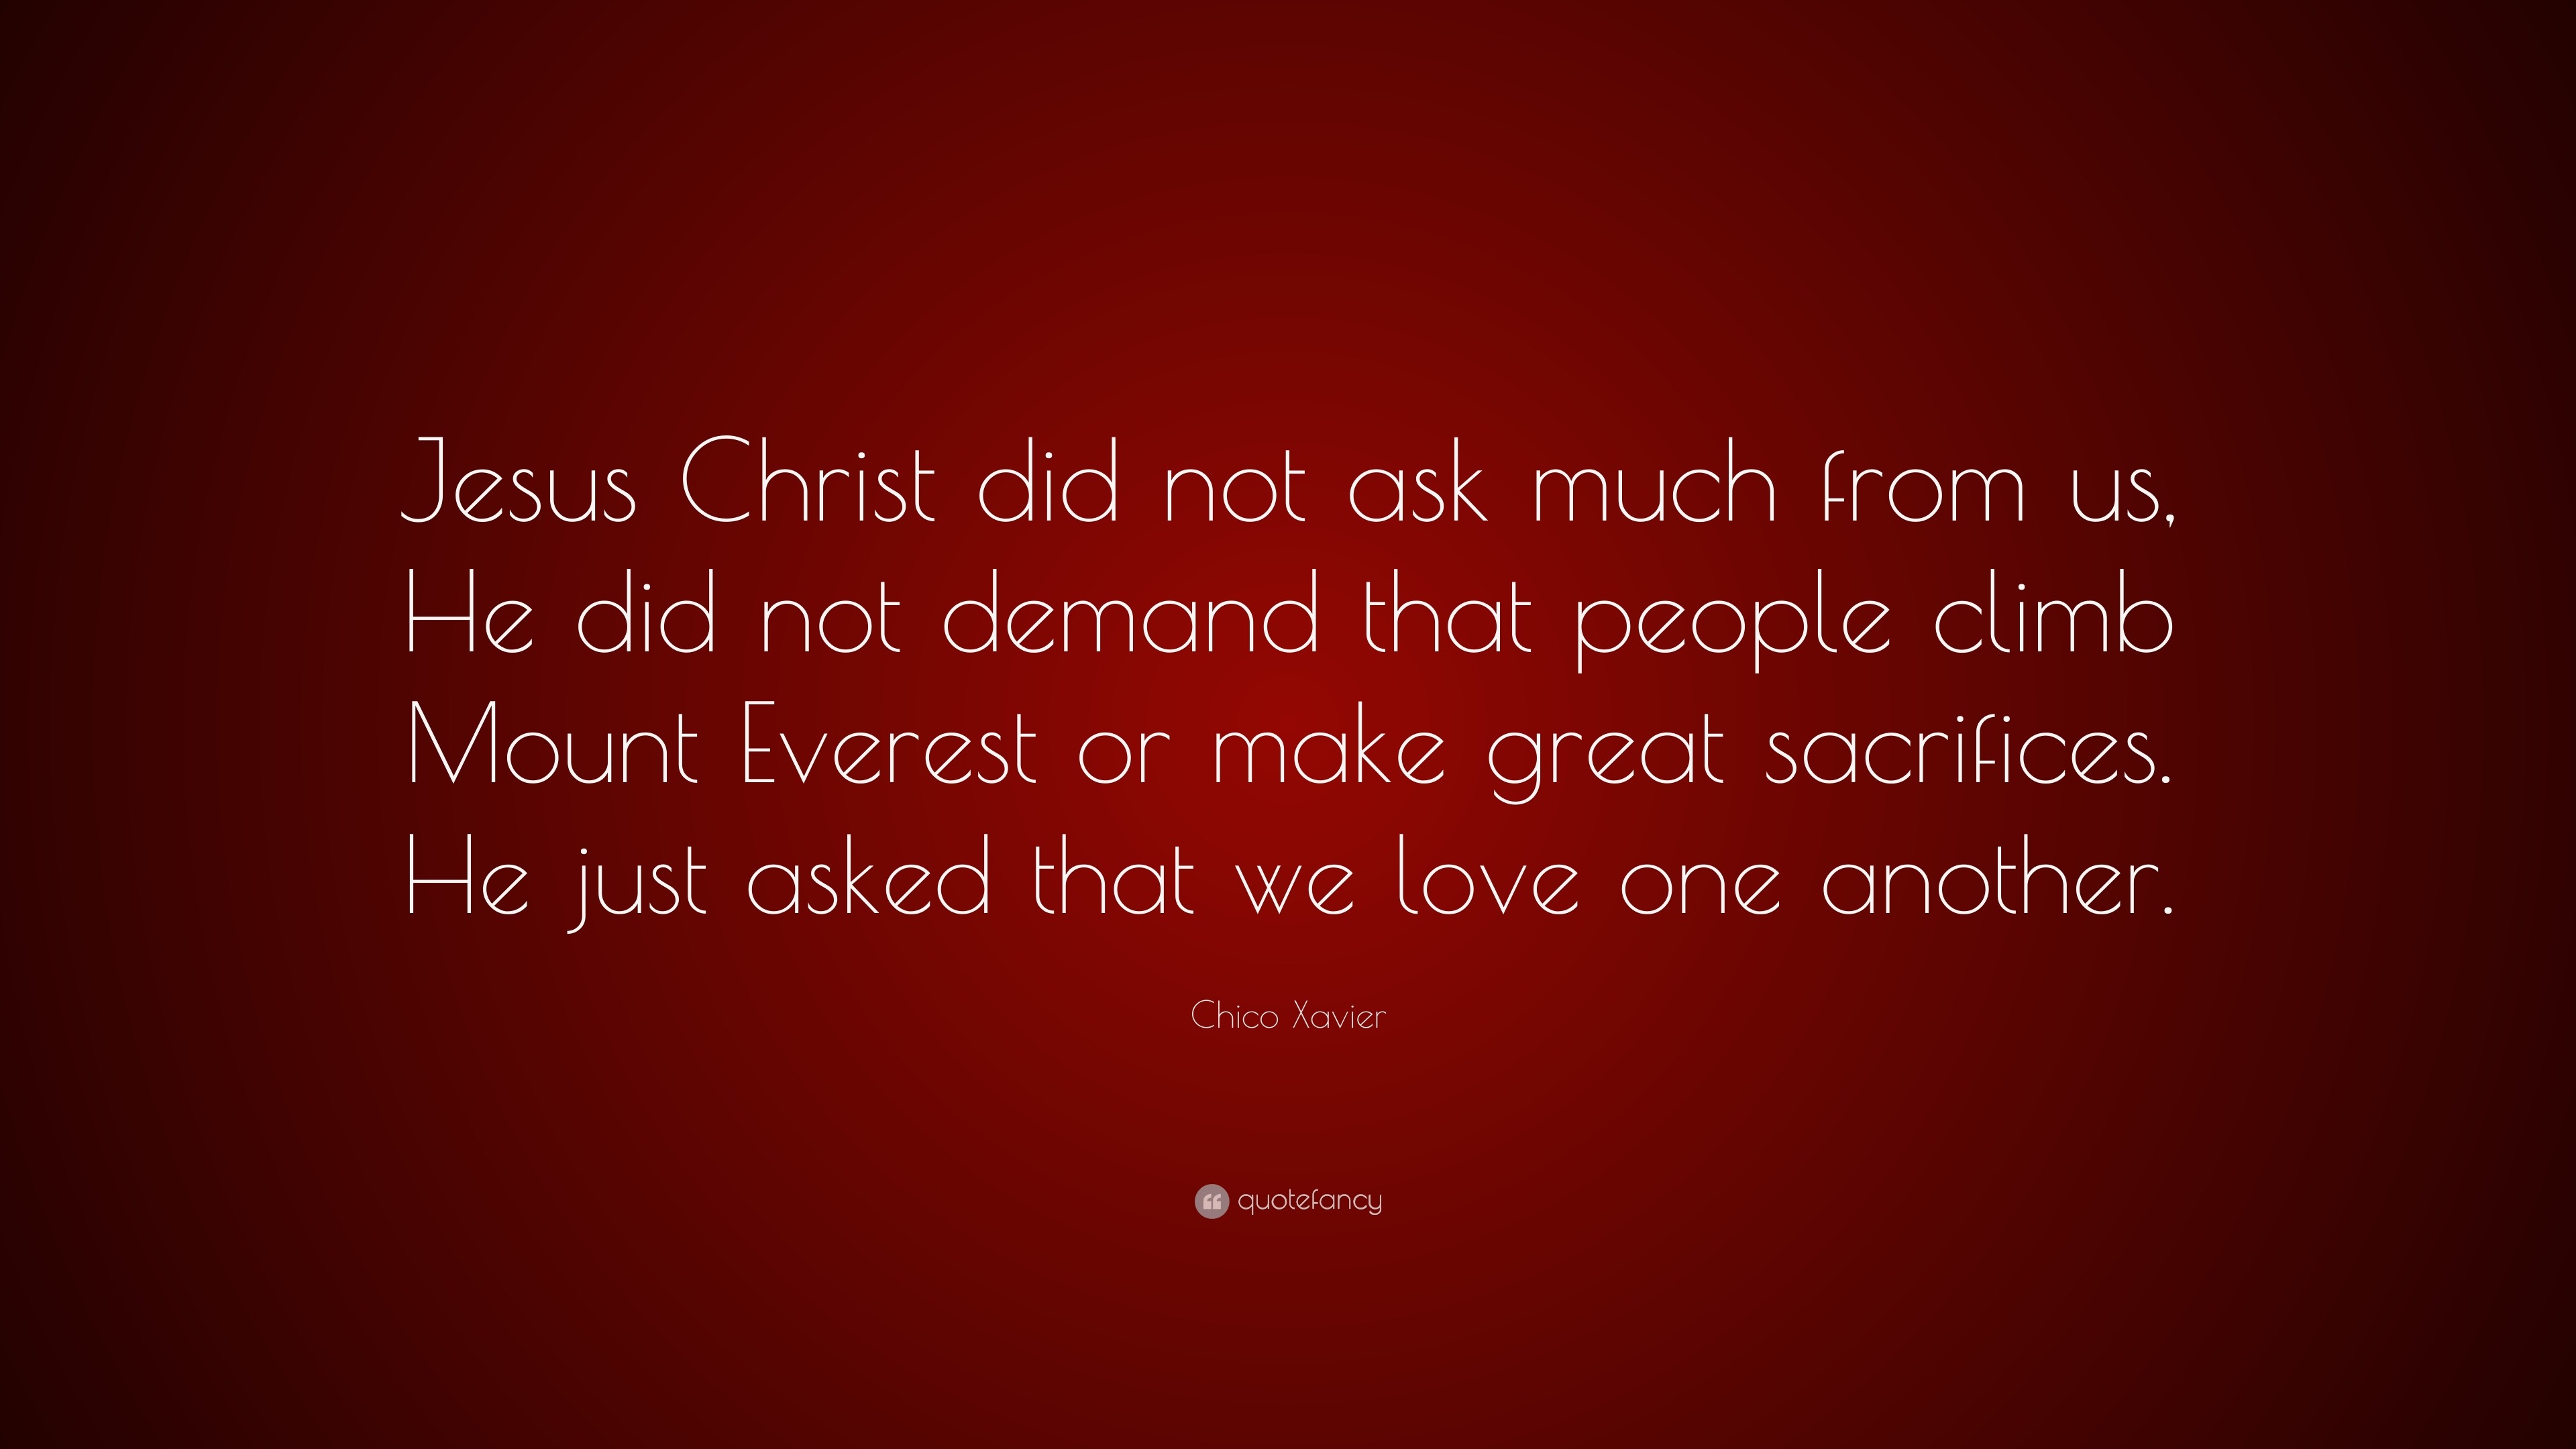 Chico Xavier Quote “Jesus Christ did not ask much from us He did